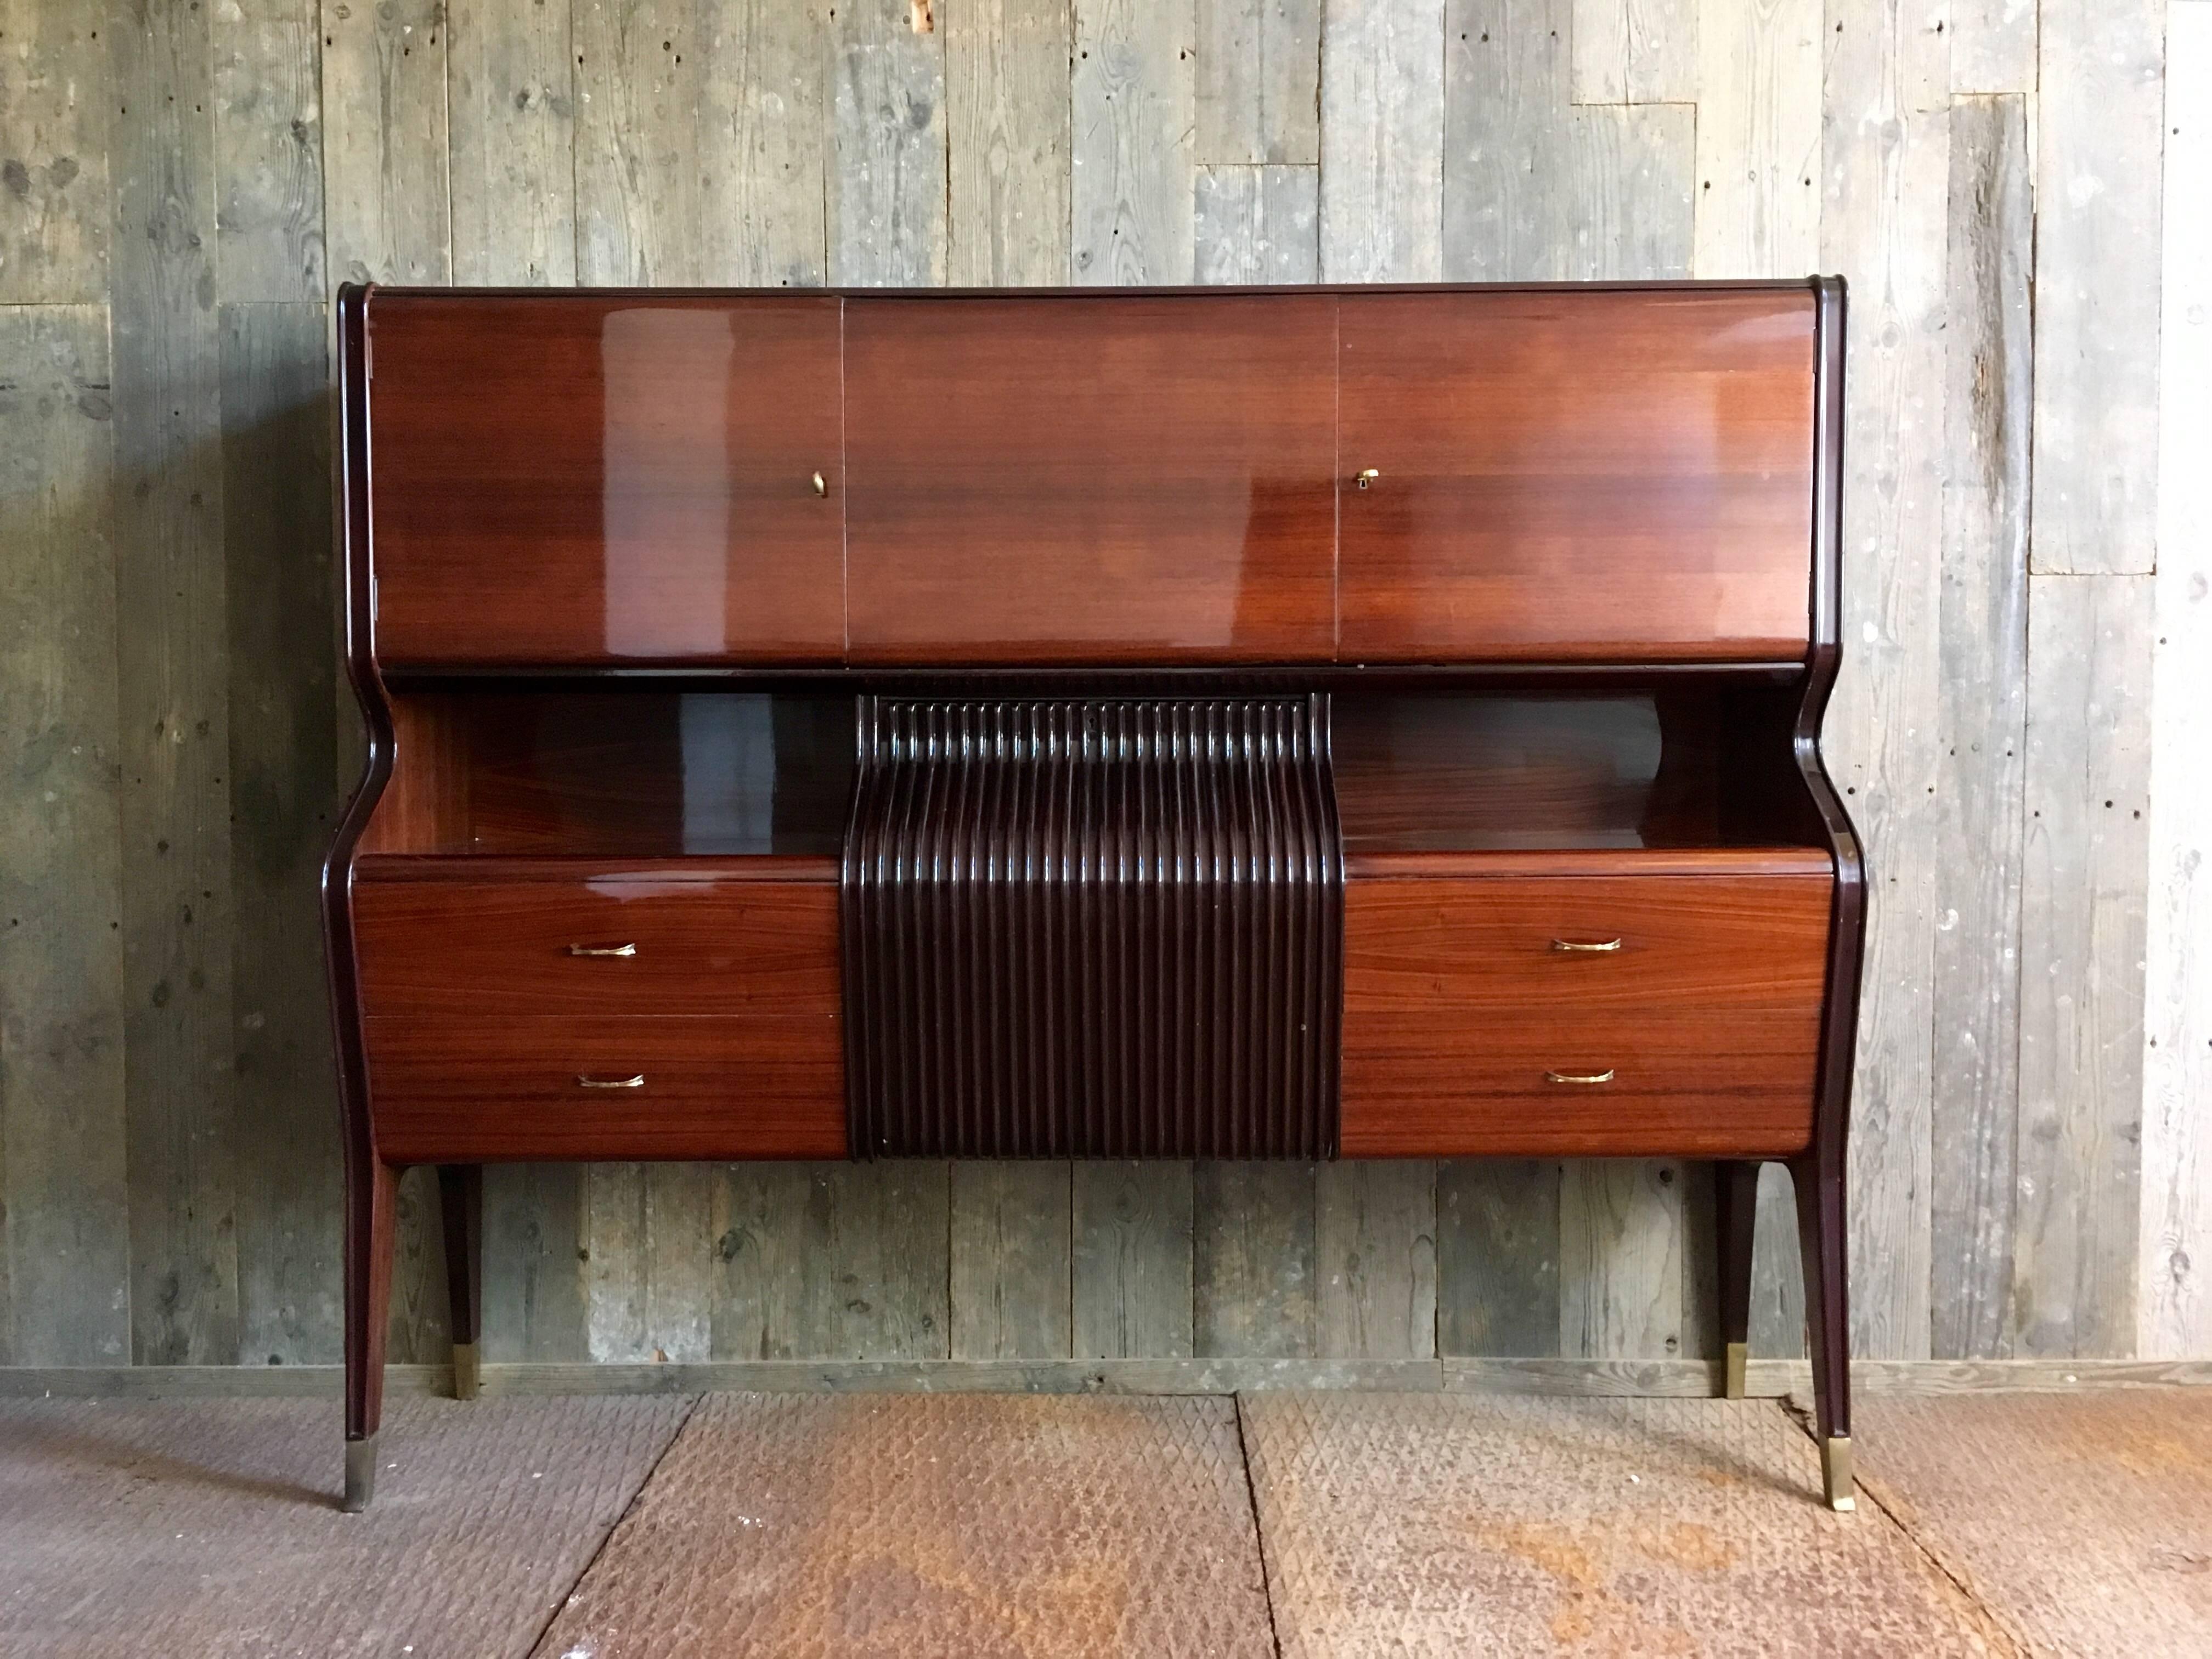 Cherry veneer bar cabinet attributed to Italian designer Osvaldo Borsani (1911-1985).
The veneer surface is very shiny and in a great condition.
The handles are made of brass and so is the protection around the feet of the cabinet. 

The interior of